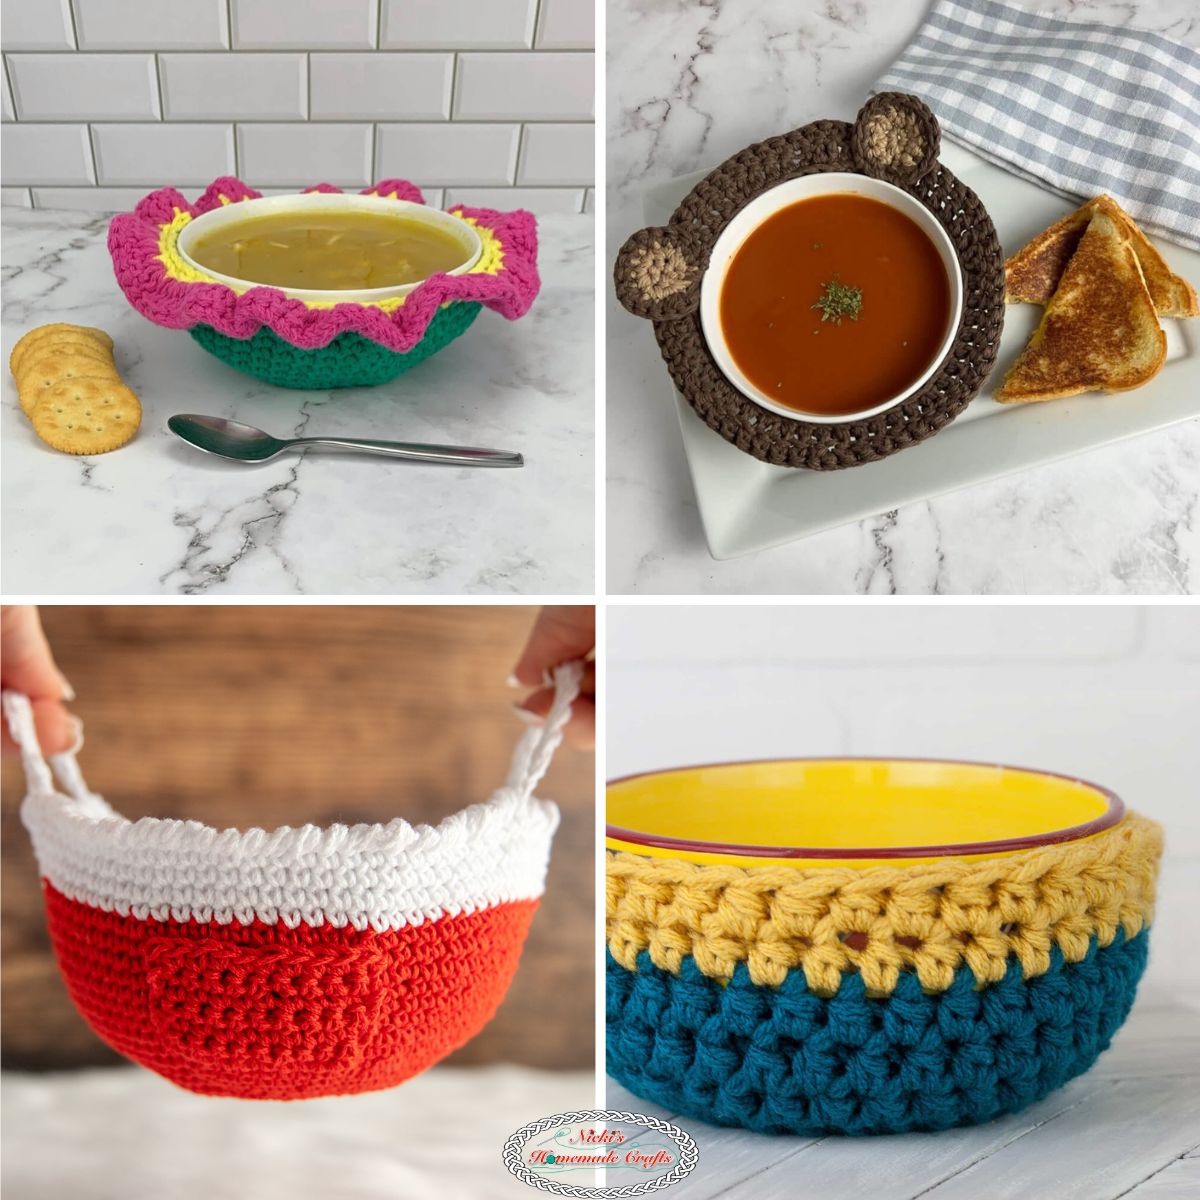 Practical Crochet Bowl Cozy Pattern for Your Home - Simply Hooked by Janet